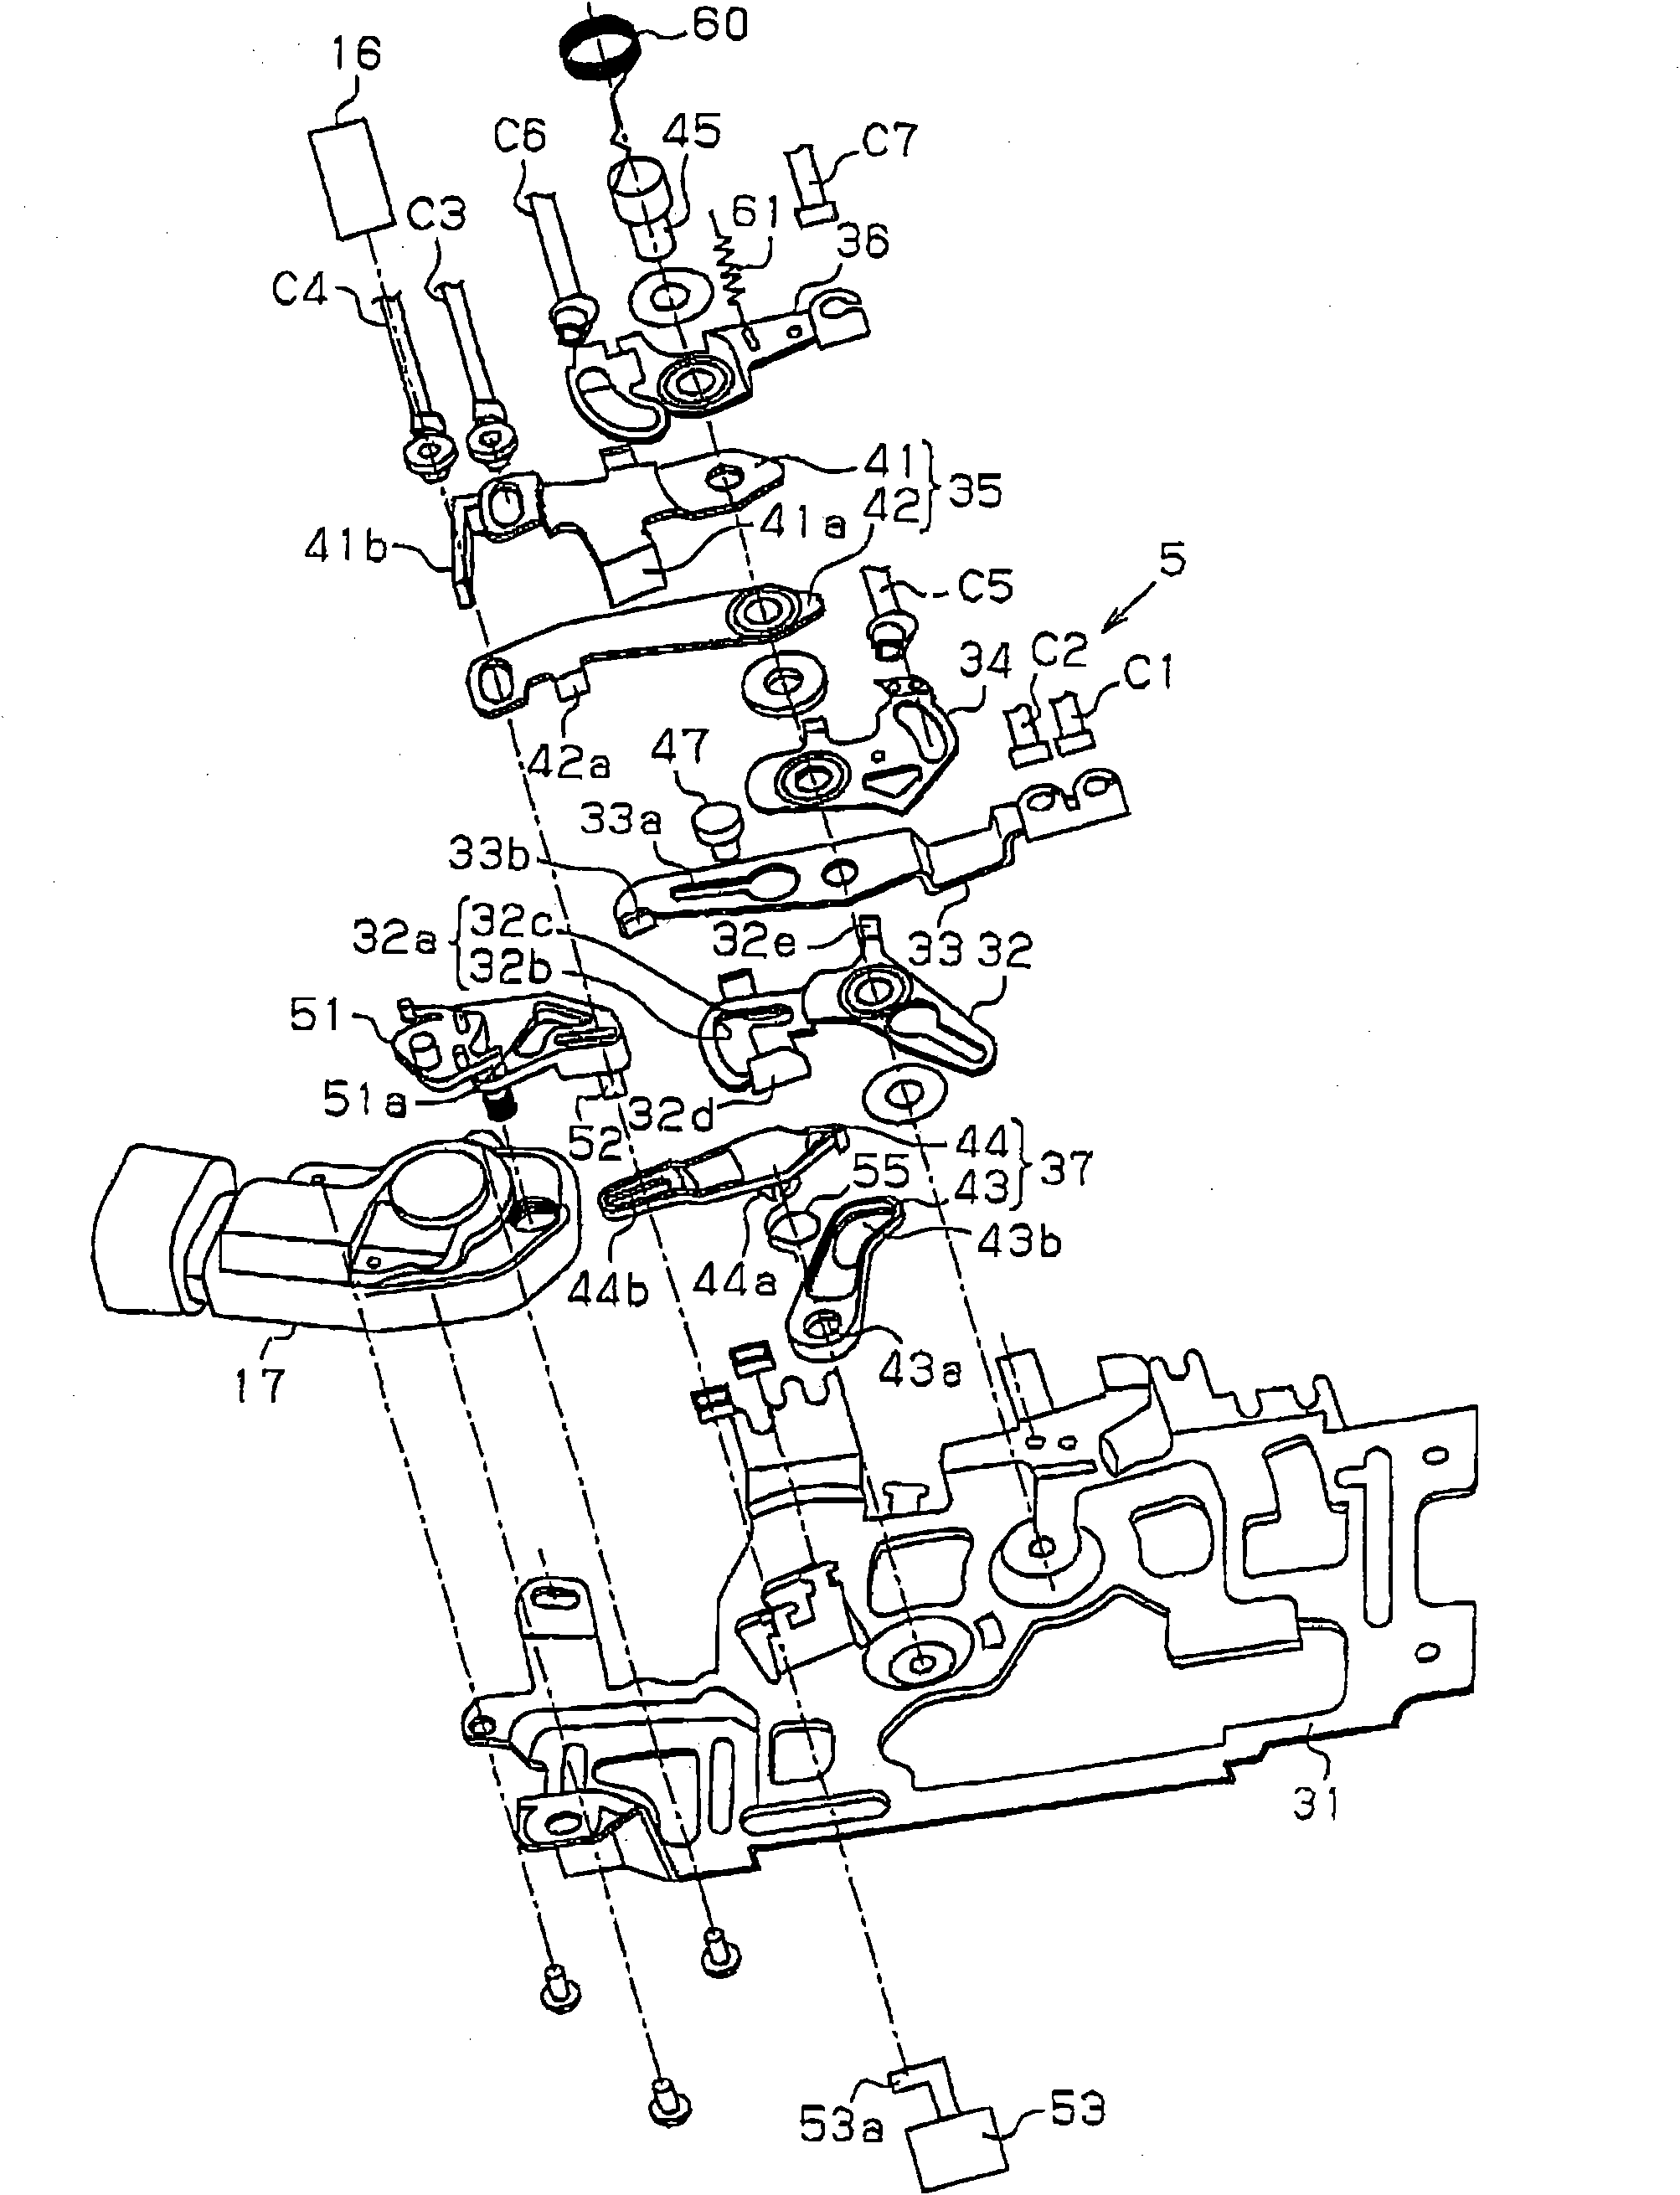 Door opening and closing apparatus for vehicle